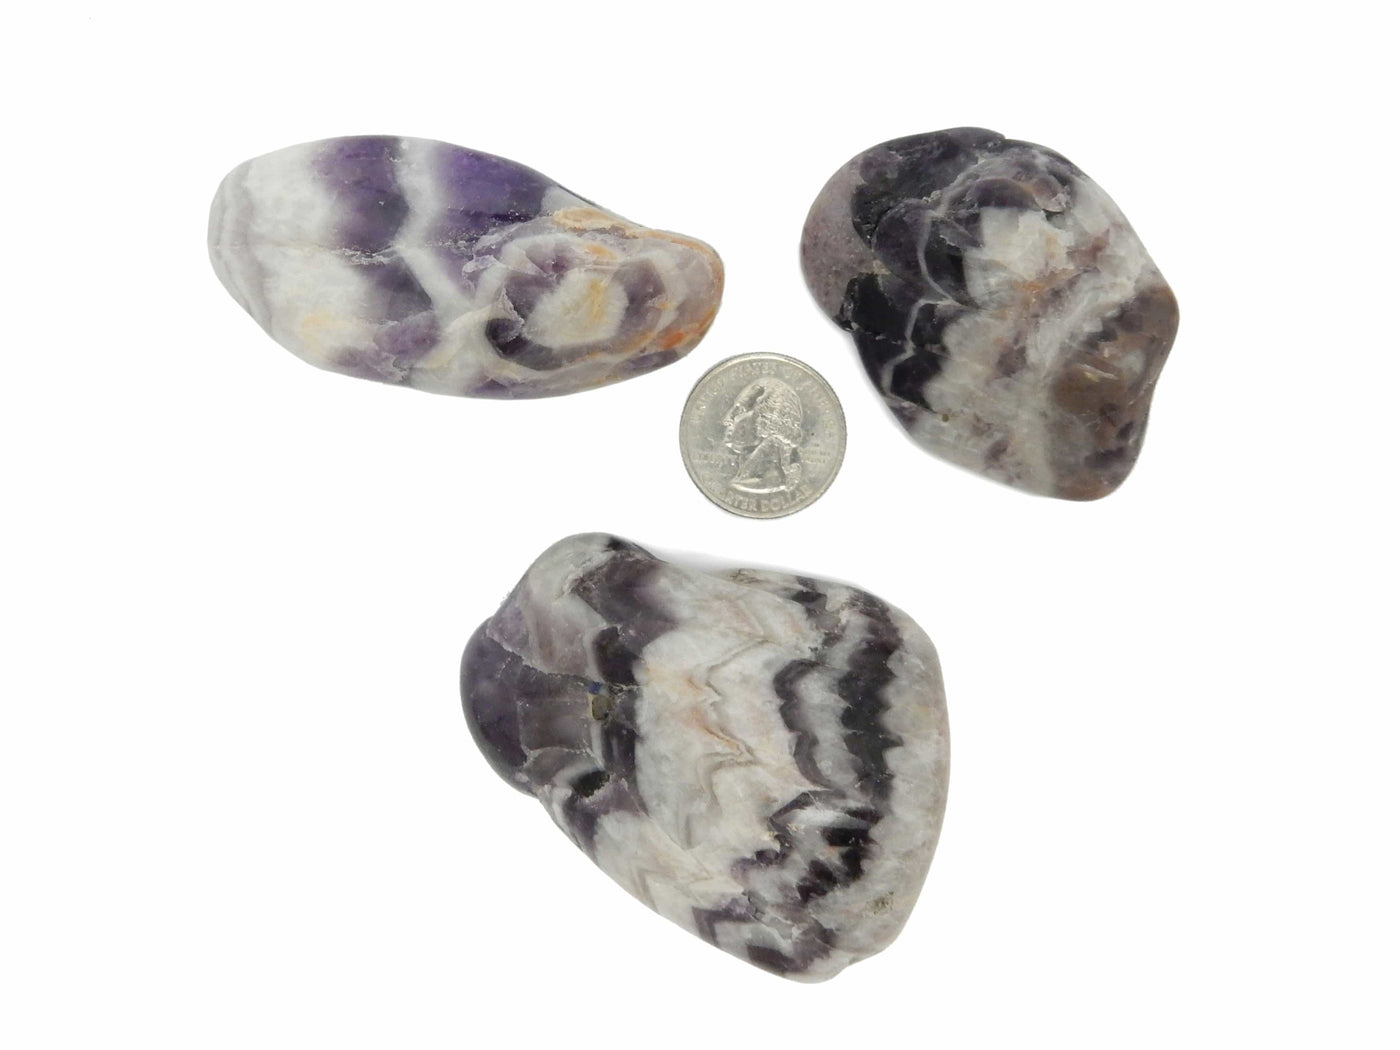 3 tumbled chevron amethyst next to a quarter for size reference on white background